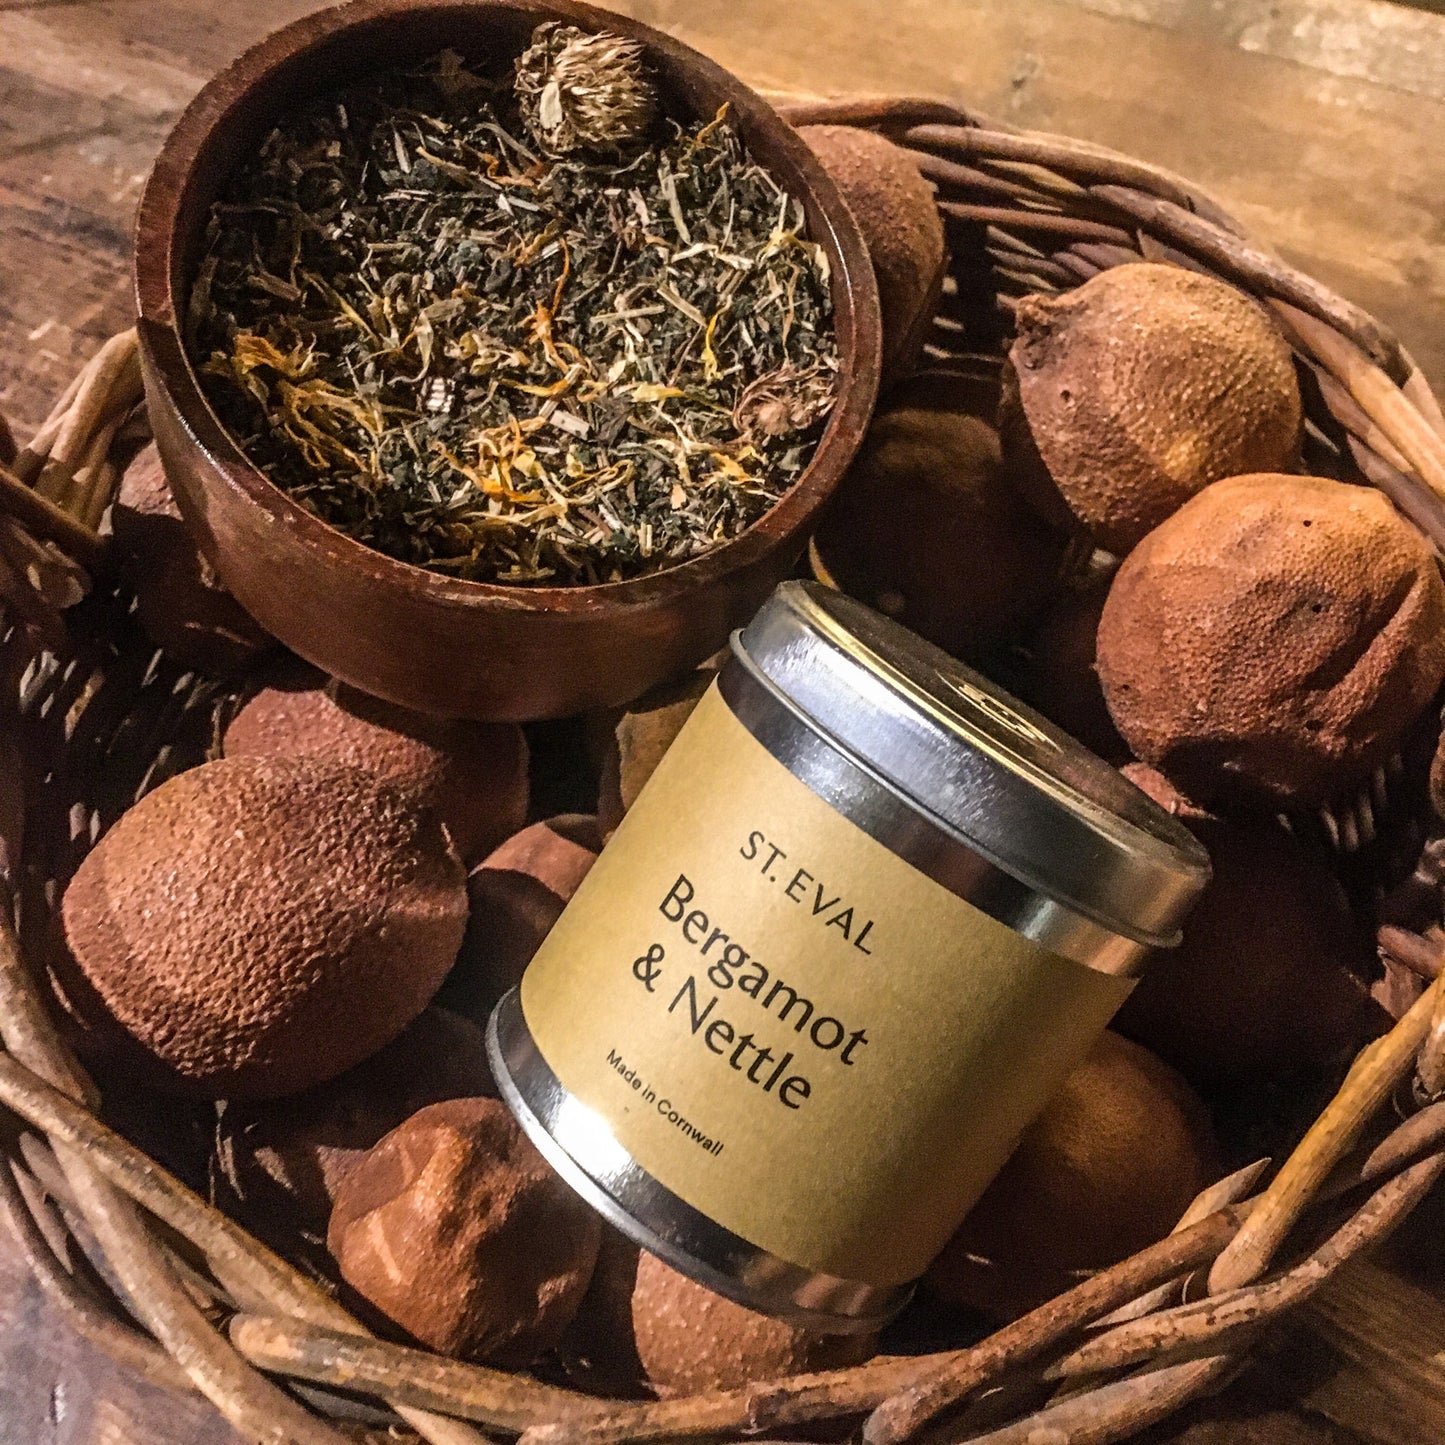 A bergamot and nettle candle tin in a wicker basket of dried fruit next to a wooden bowl of dried herbs